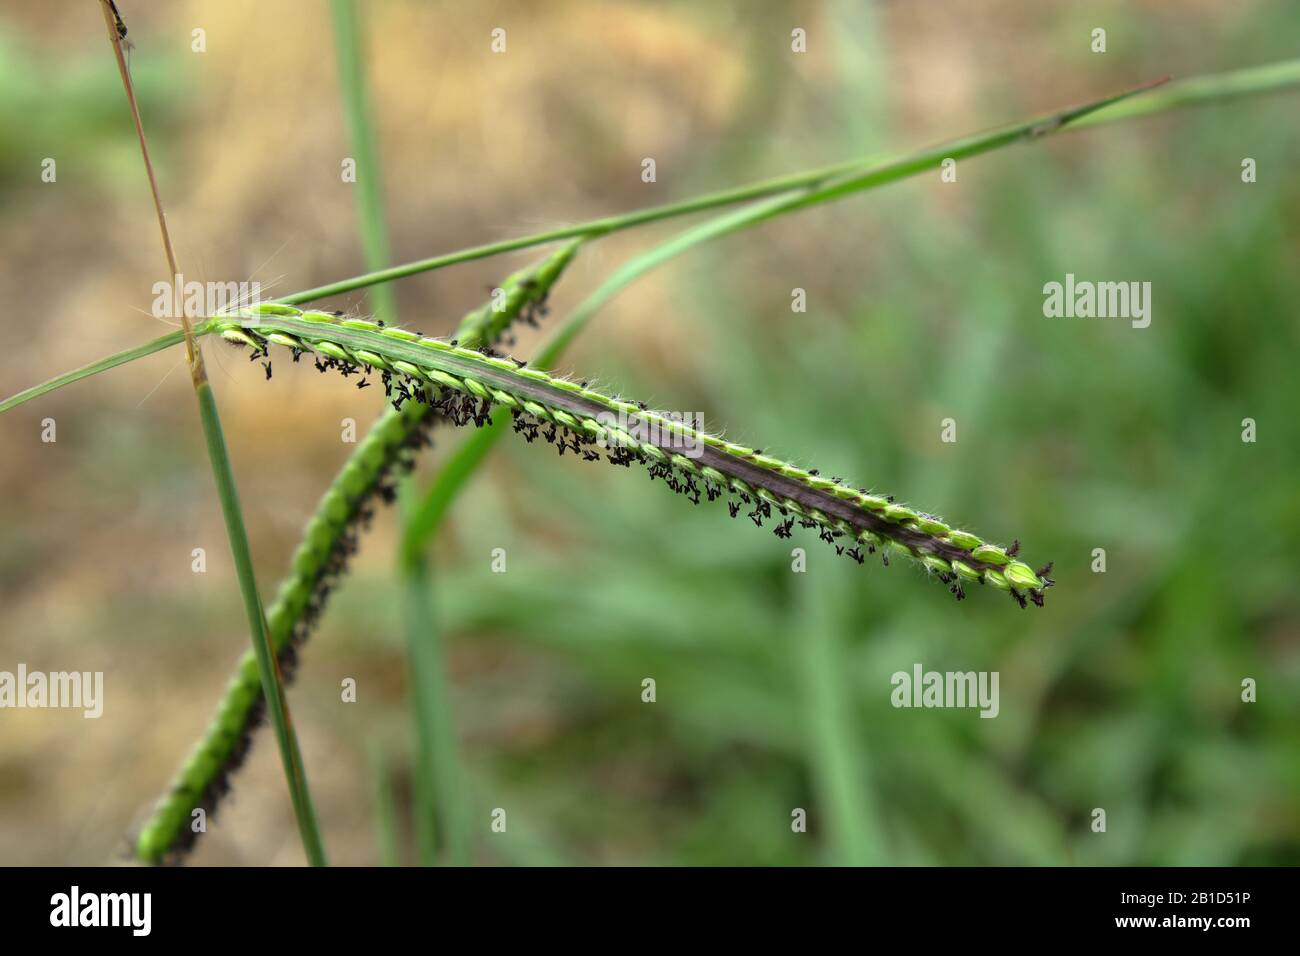 Common signal grass, Urochloa Brizantha- found as a noxious week in Australia, taken in NSW and Victoria. Stock Photo